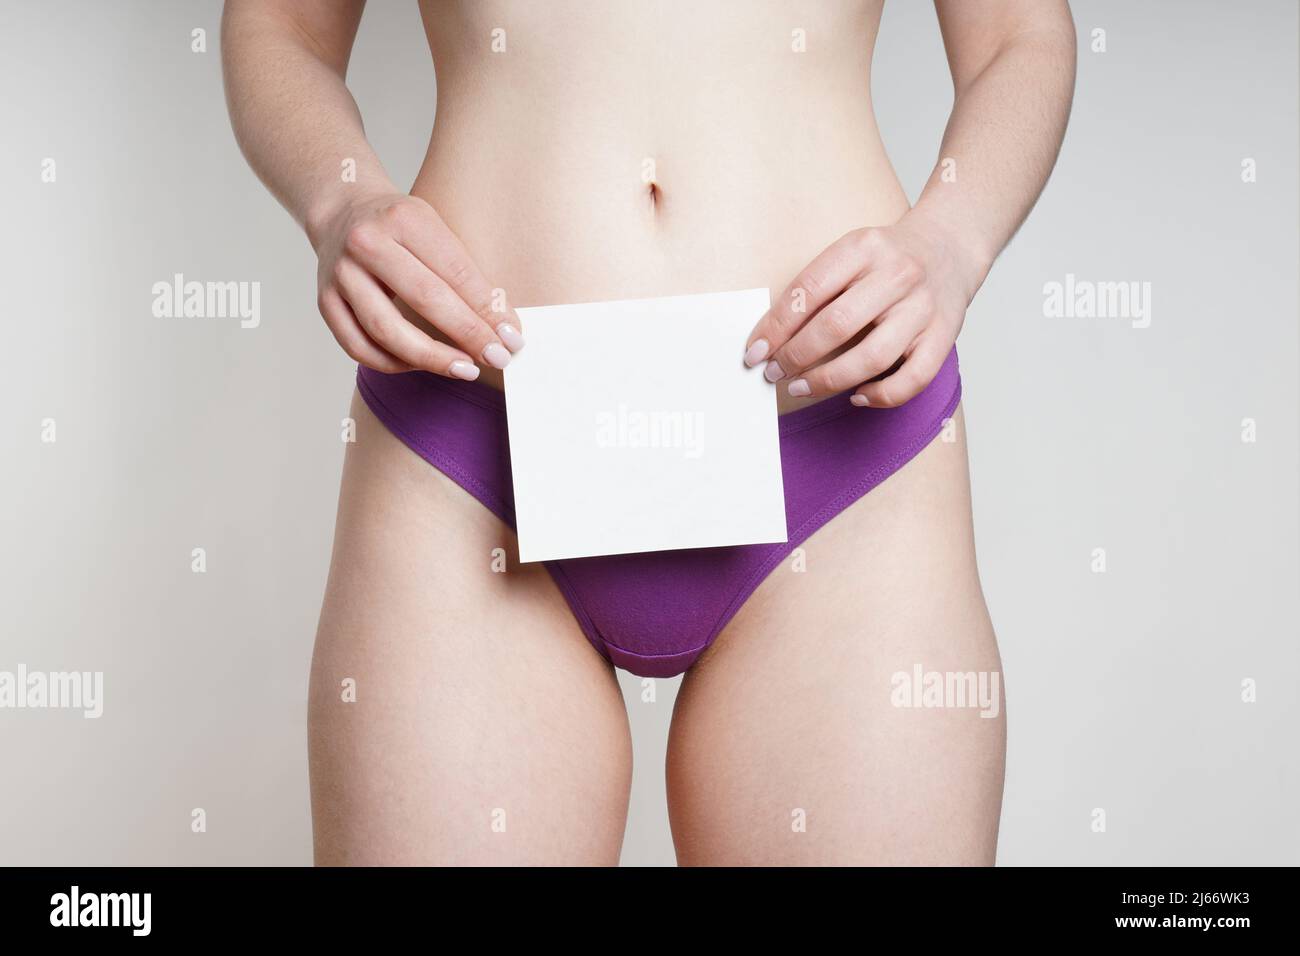 woman in panties holding blank piece of paper with copy space over genital area Stock Photo